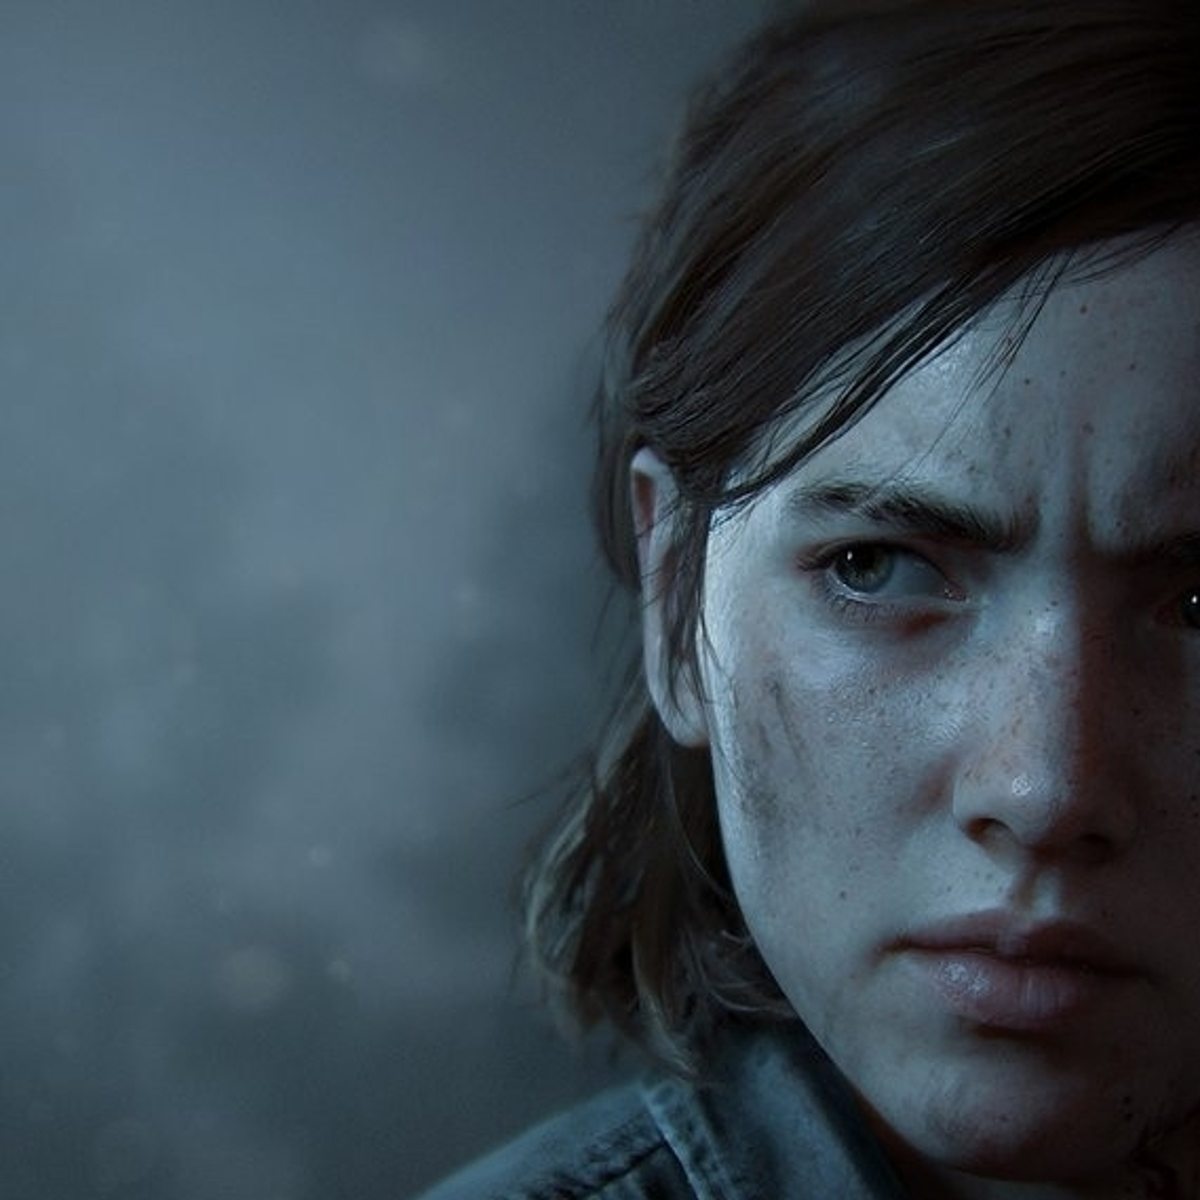 A spoiler-heavy interview with The Last of Us Part 2 director Neil